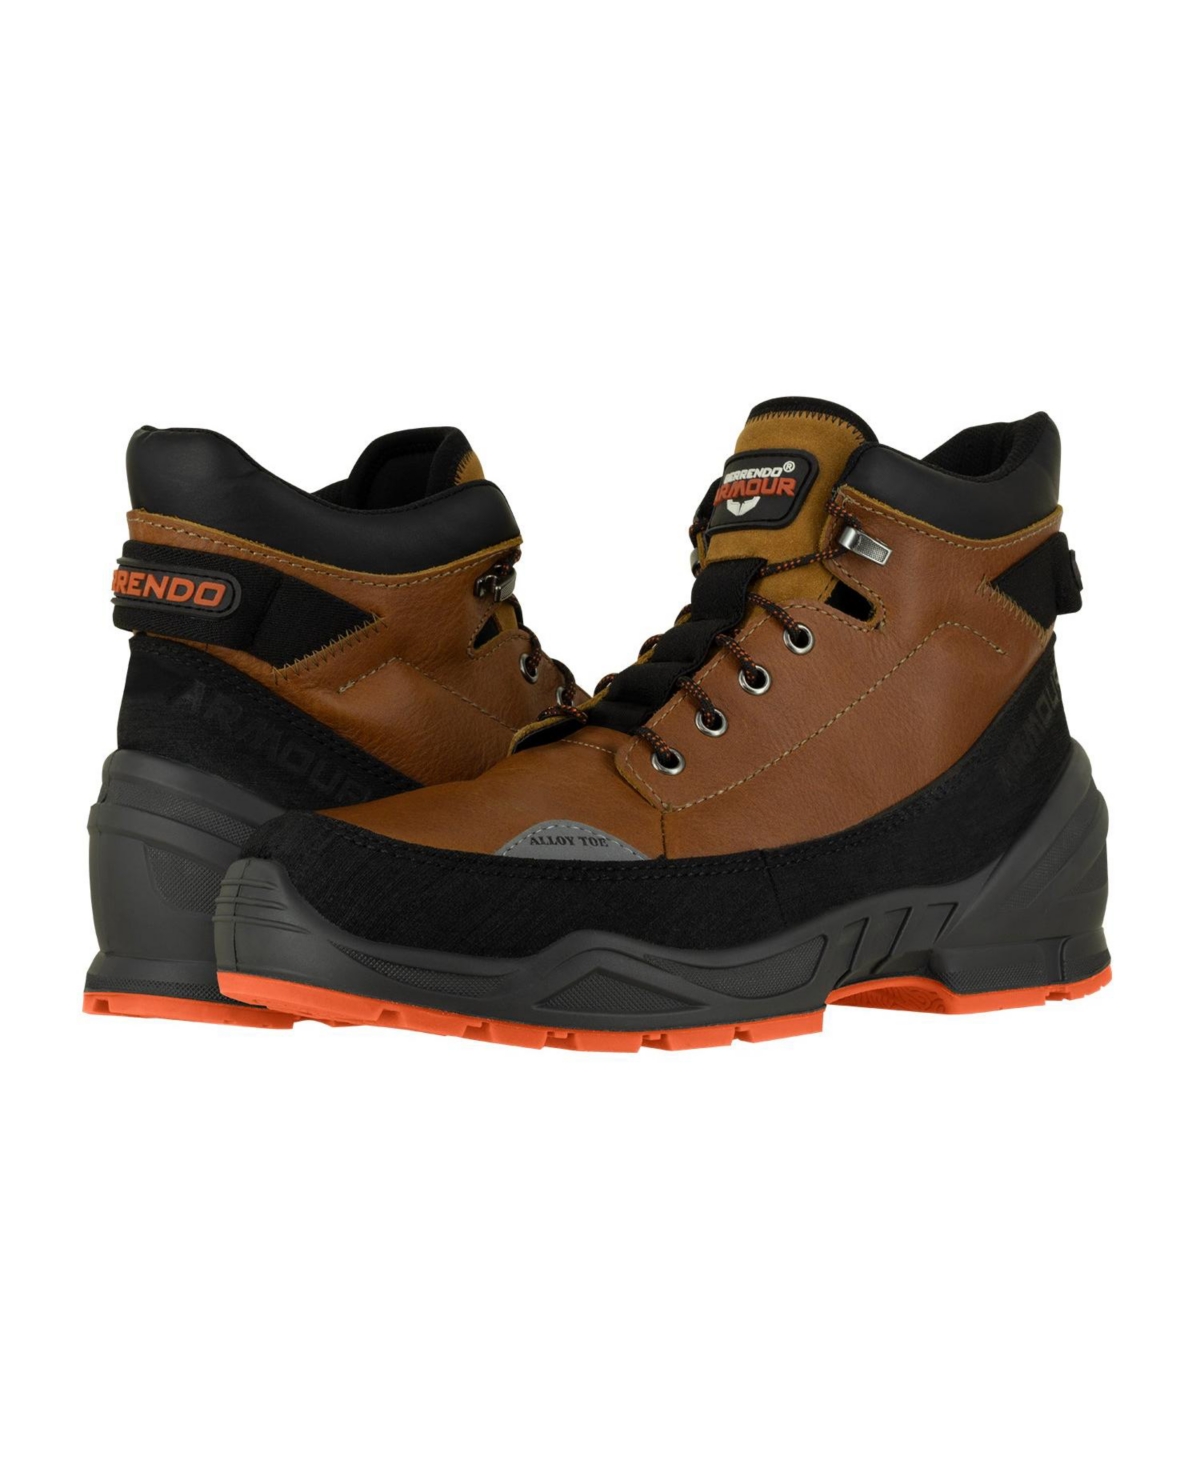 Work Boots For Men 6" - Alloy Toe Boots - Rust